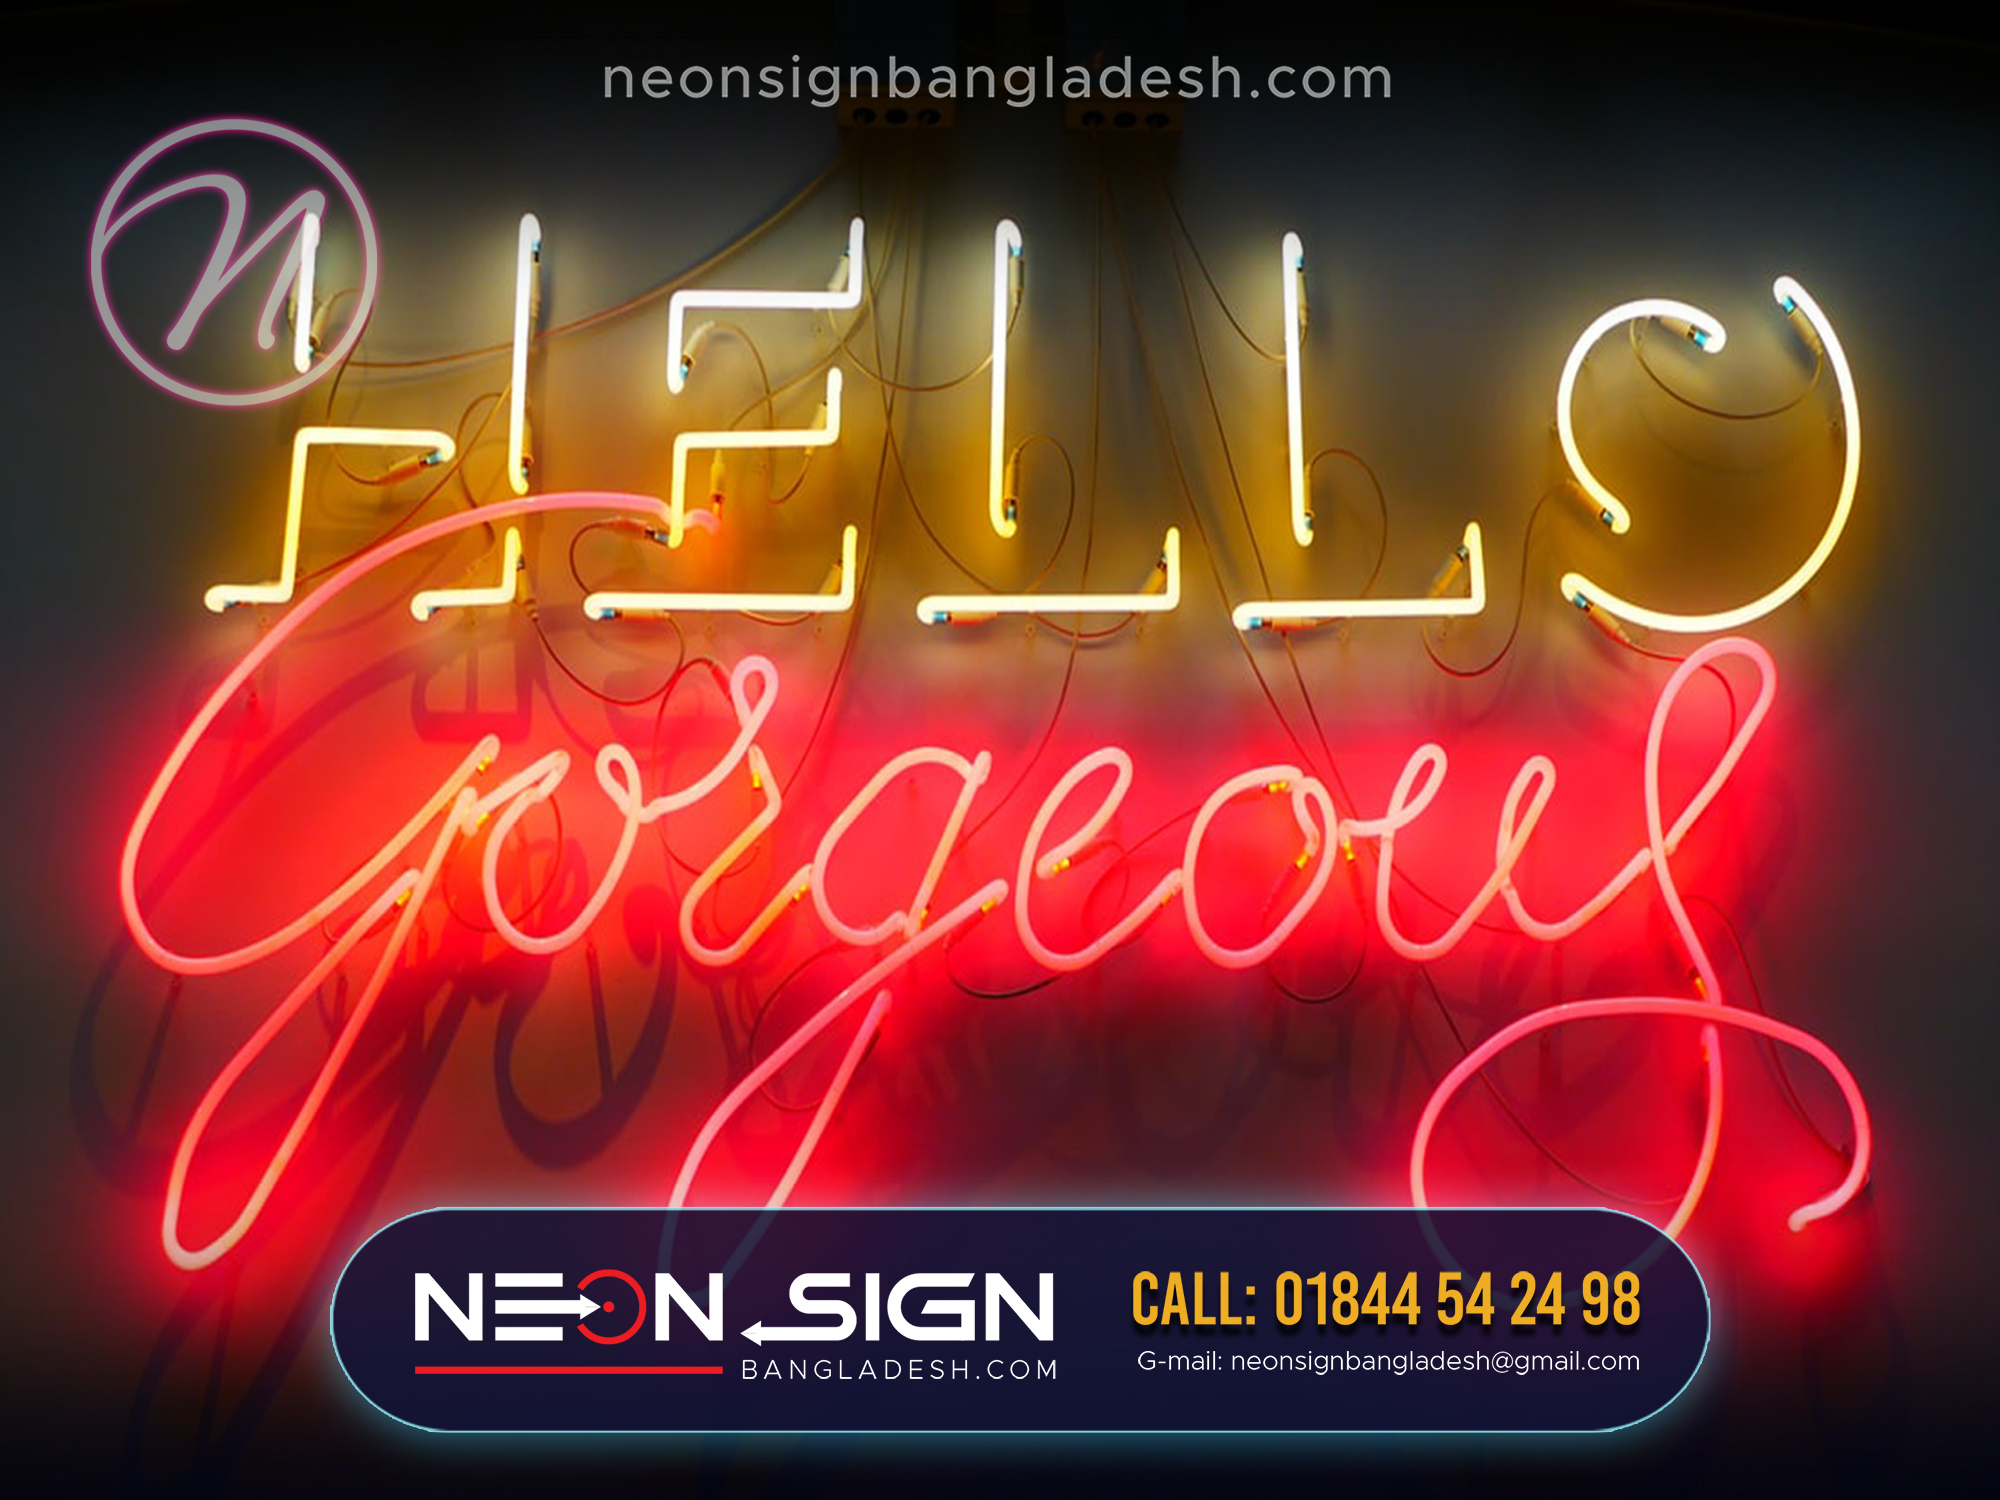 neon letter signage in Bangladesh, neon sign price bd, Best Neon Sign Company in Bangladesh. Top 10 Neon Signage Agency in Dhaka Bangladesh. Neon Advertising Agency Dhaka Bangladesh.